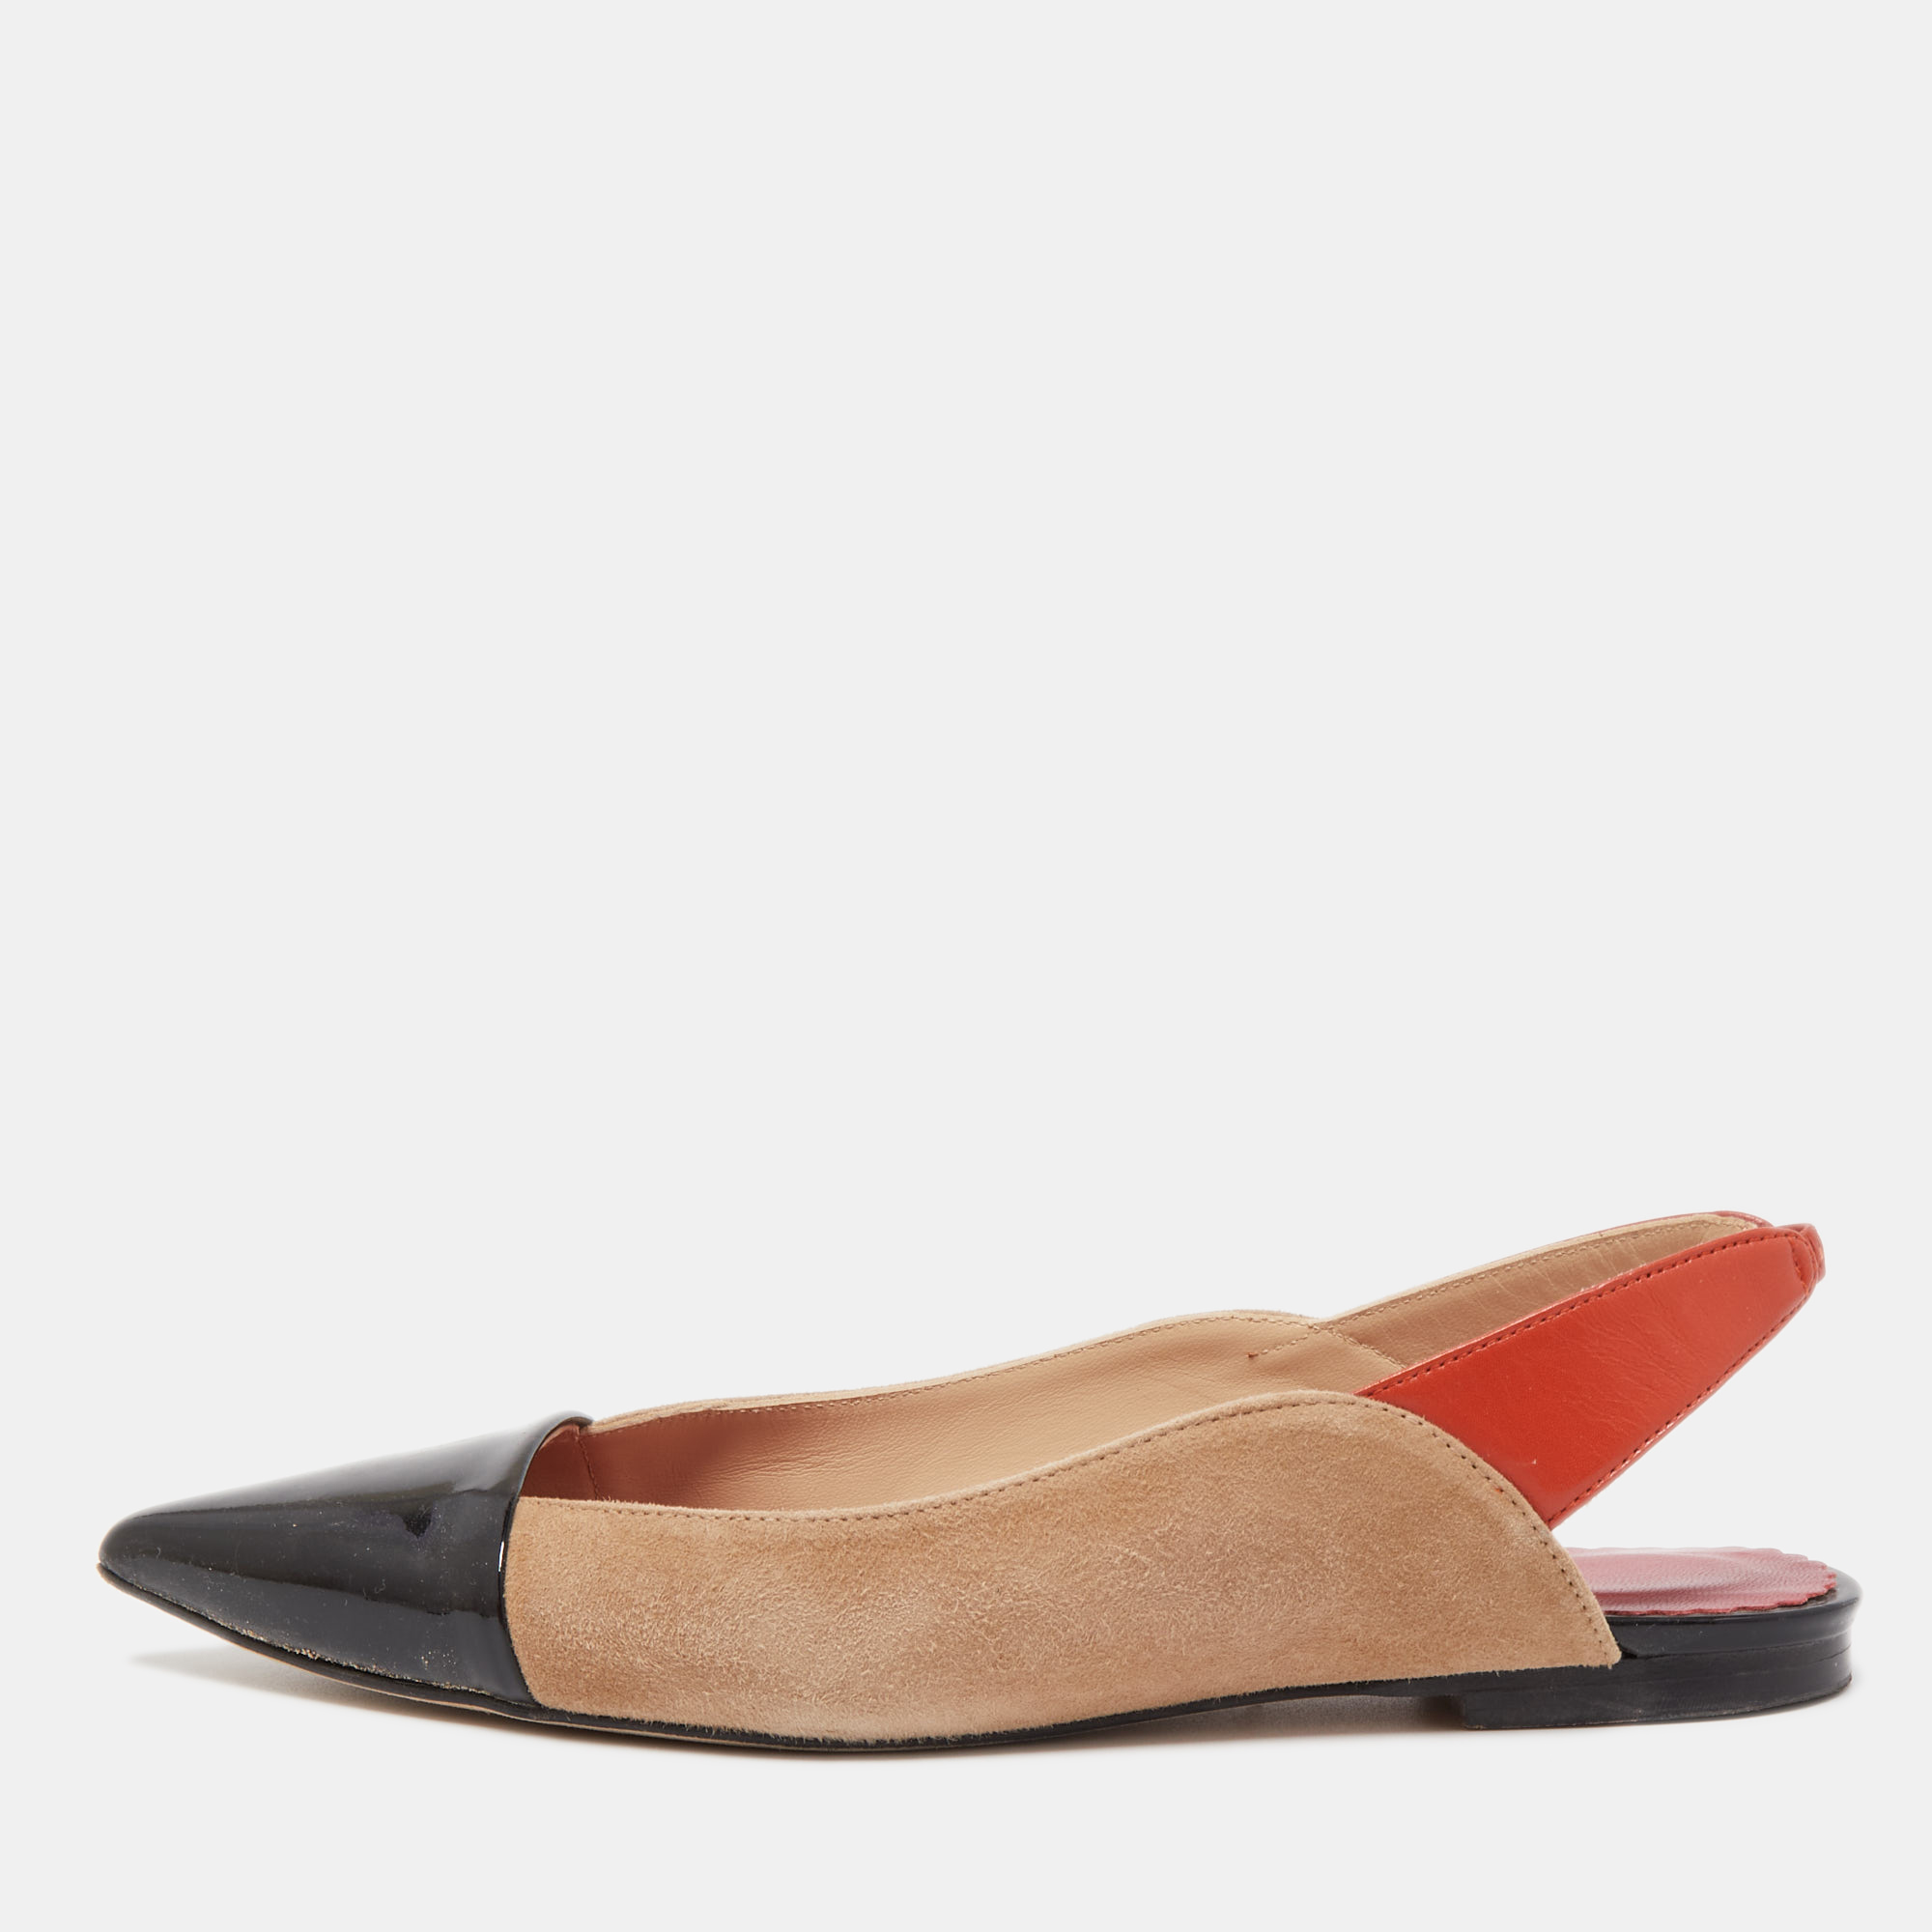 Carolina Herrera Multicolor Suede And Leather Pointed Toe Slingback Flats Size 37